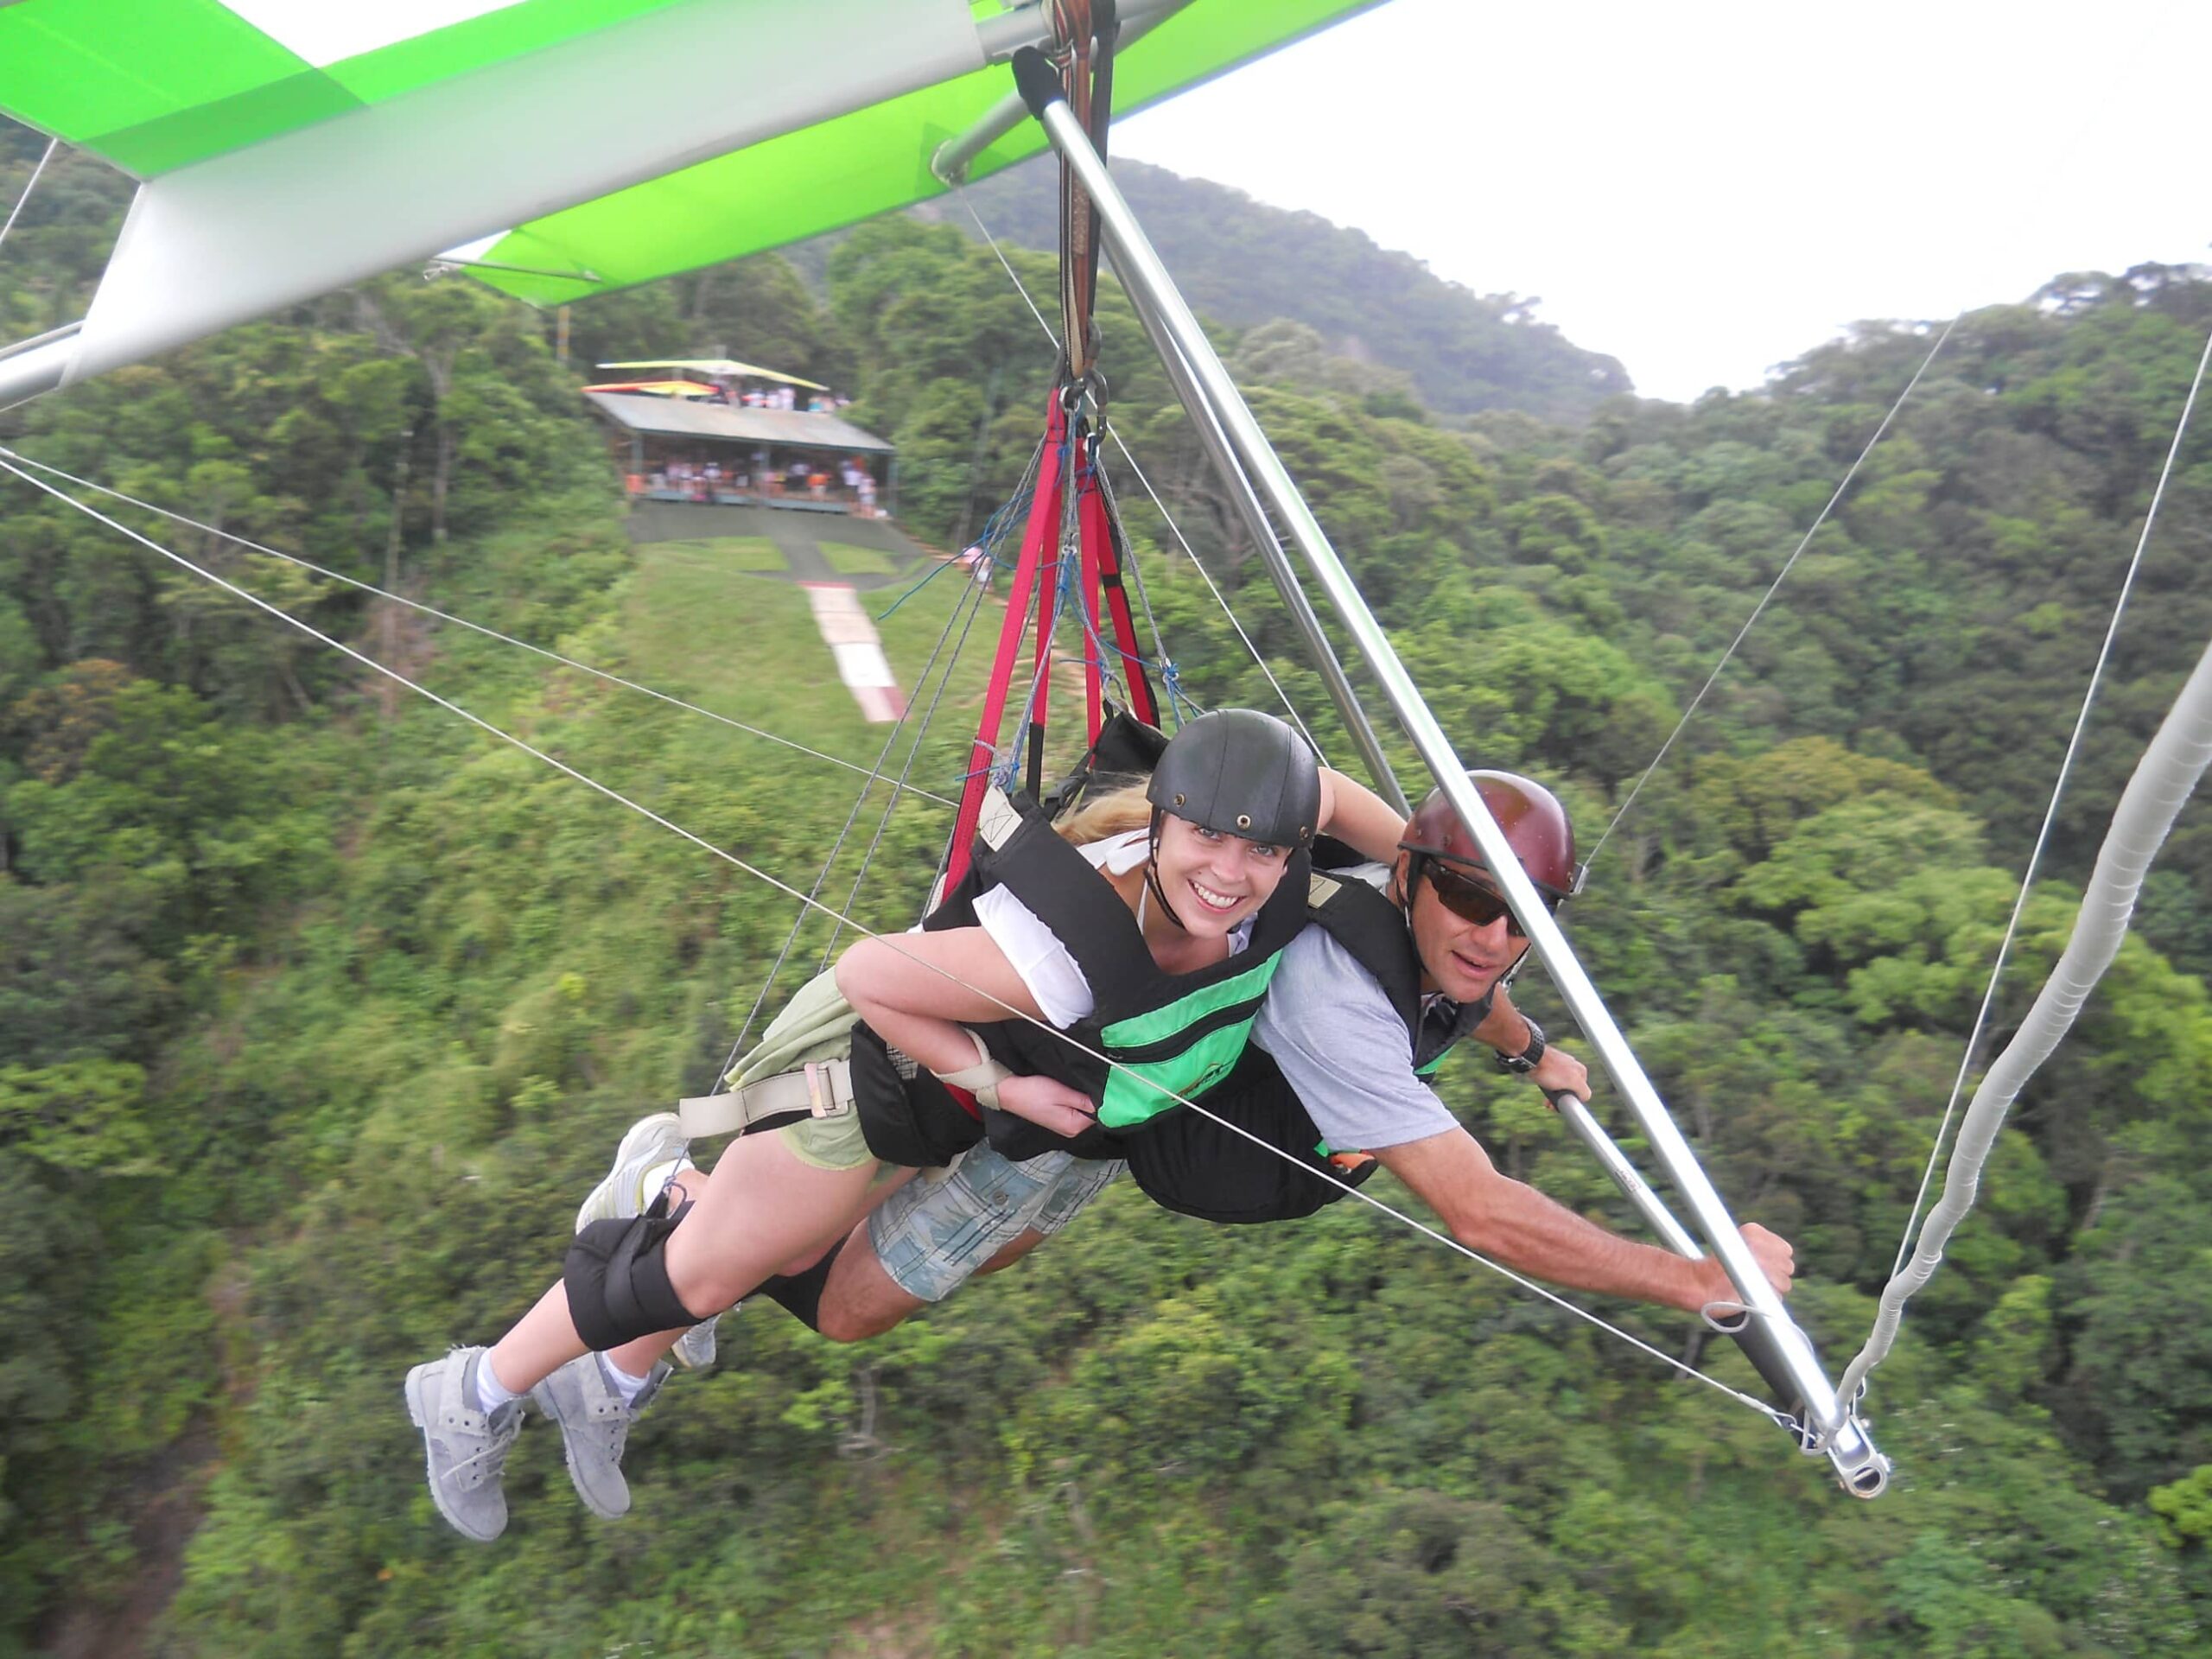 Rio_Hang_Gliding_flying_at_take_off-scaled.jpg